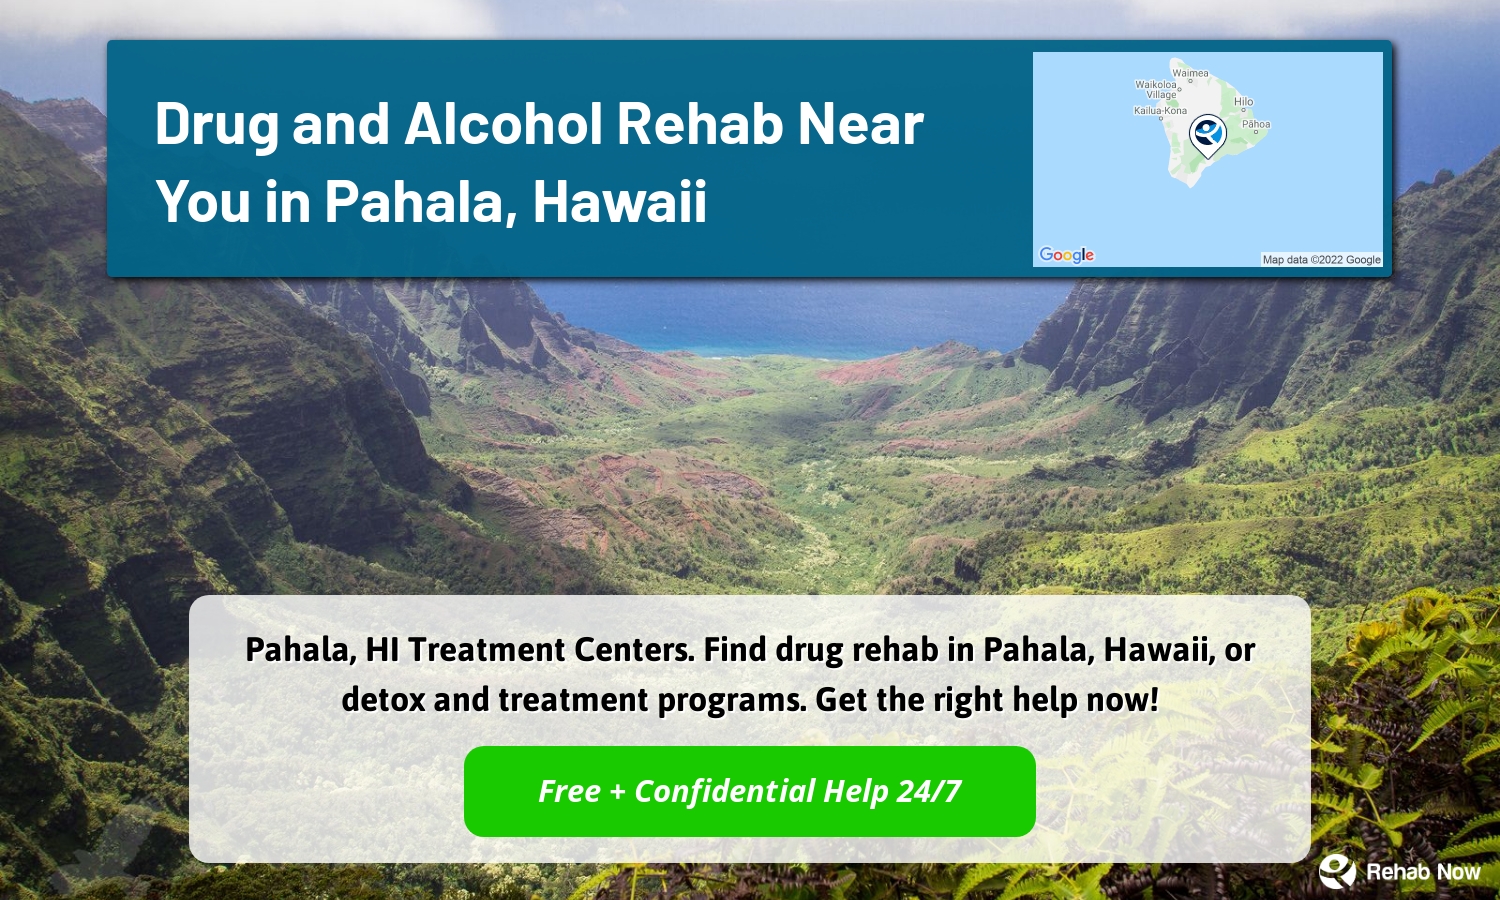 Pahala, HI Treatment Centers. Find drug rehab in Pahala, Hawaii, or detox and treatment programs. Get the right help now!